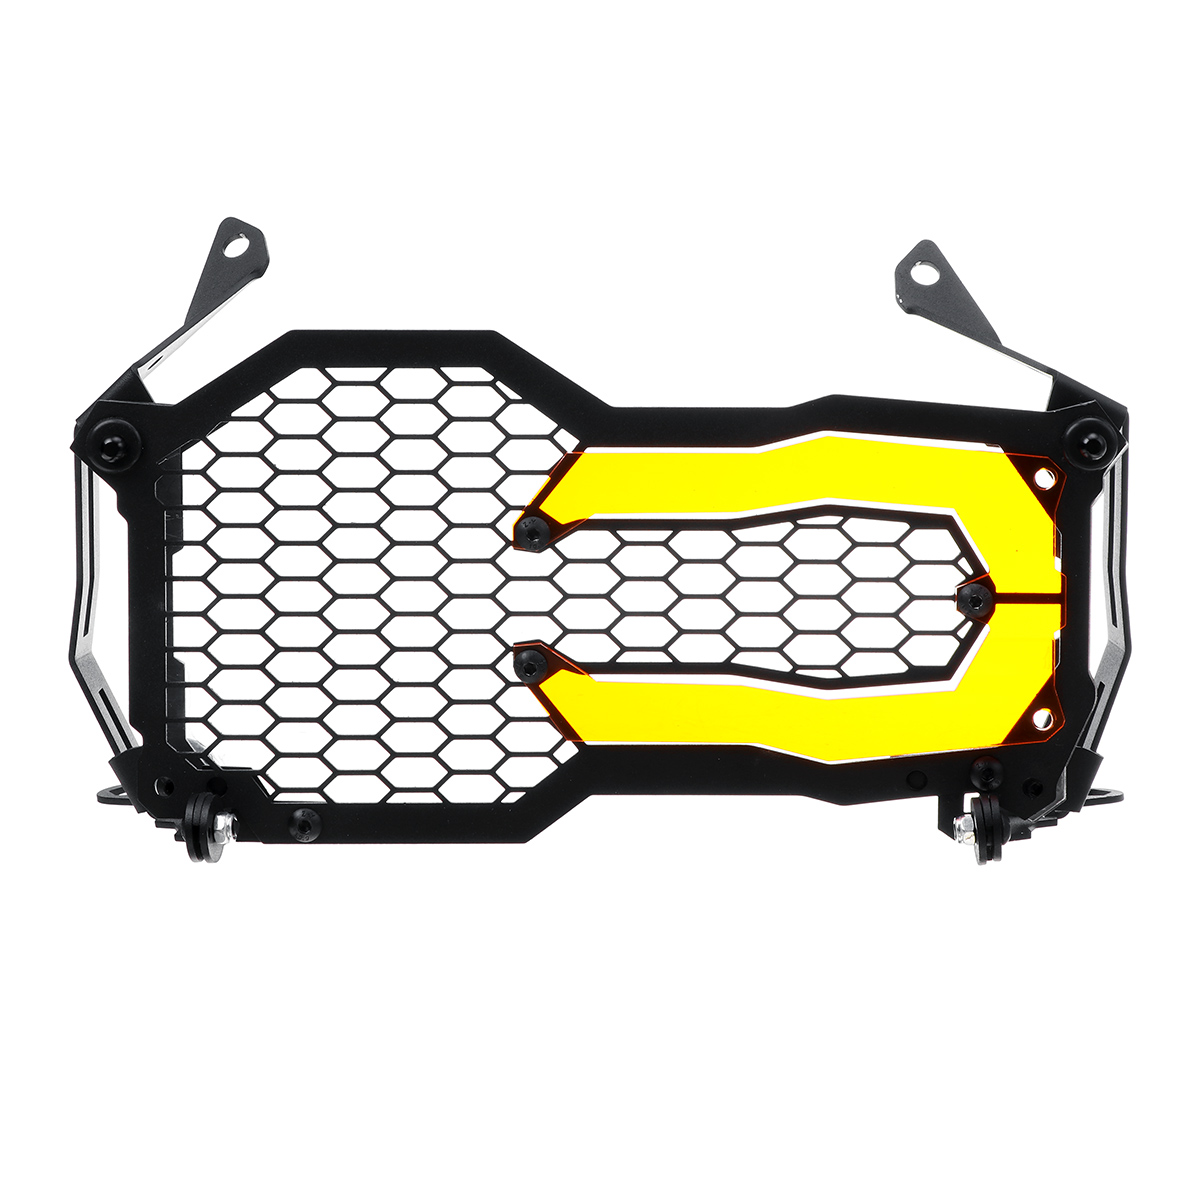 Motorcycle Headlight Grill Guard Cover Protector Trims for BMW R1200GS R1250GS - Auto GoShop